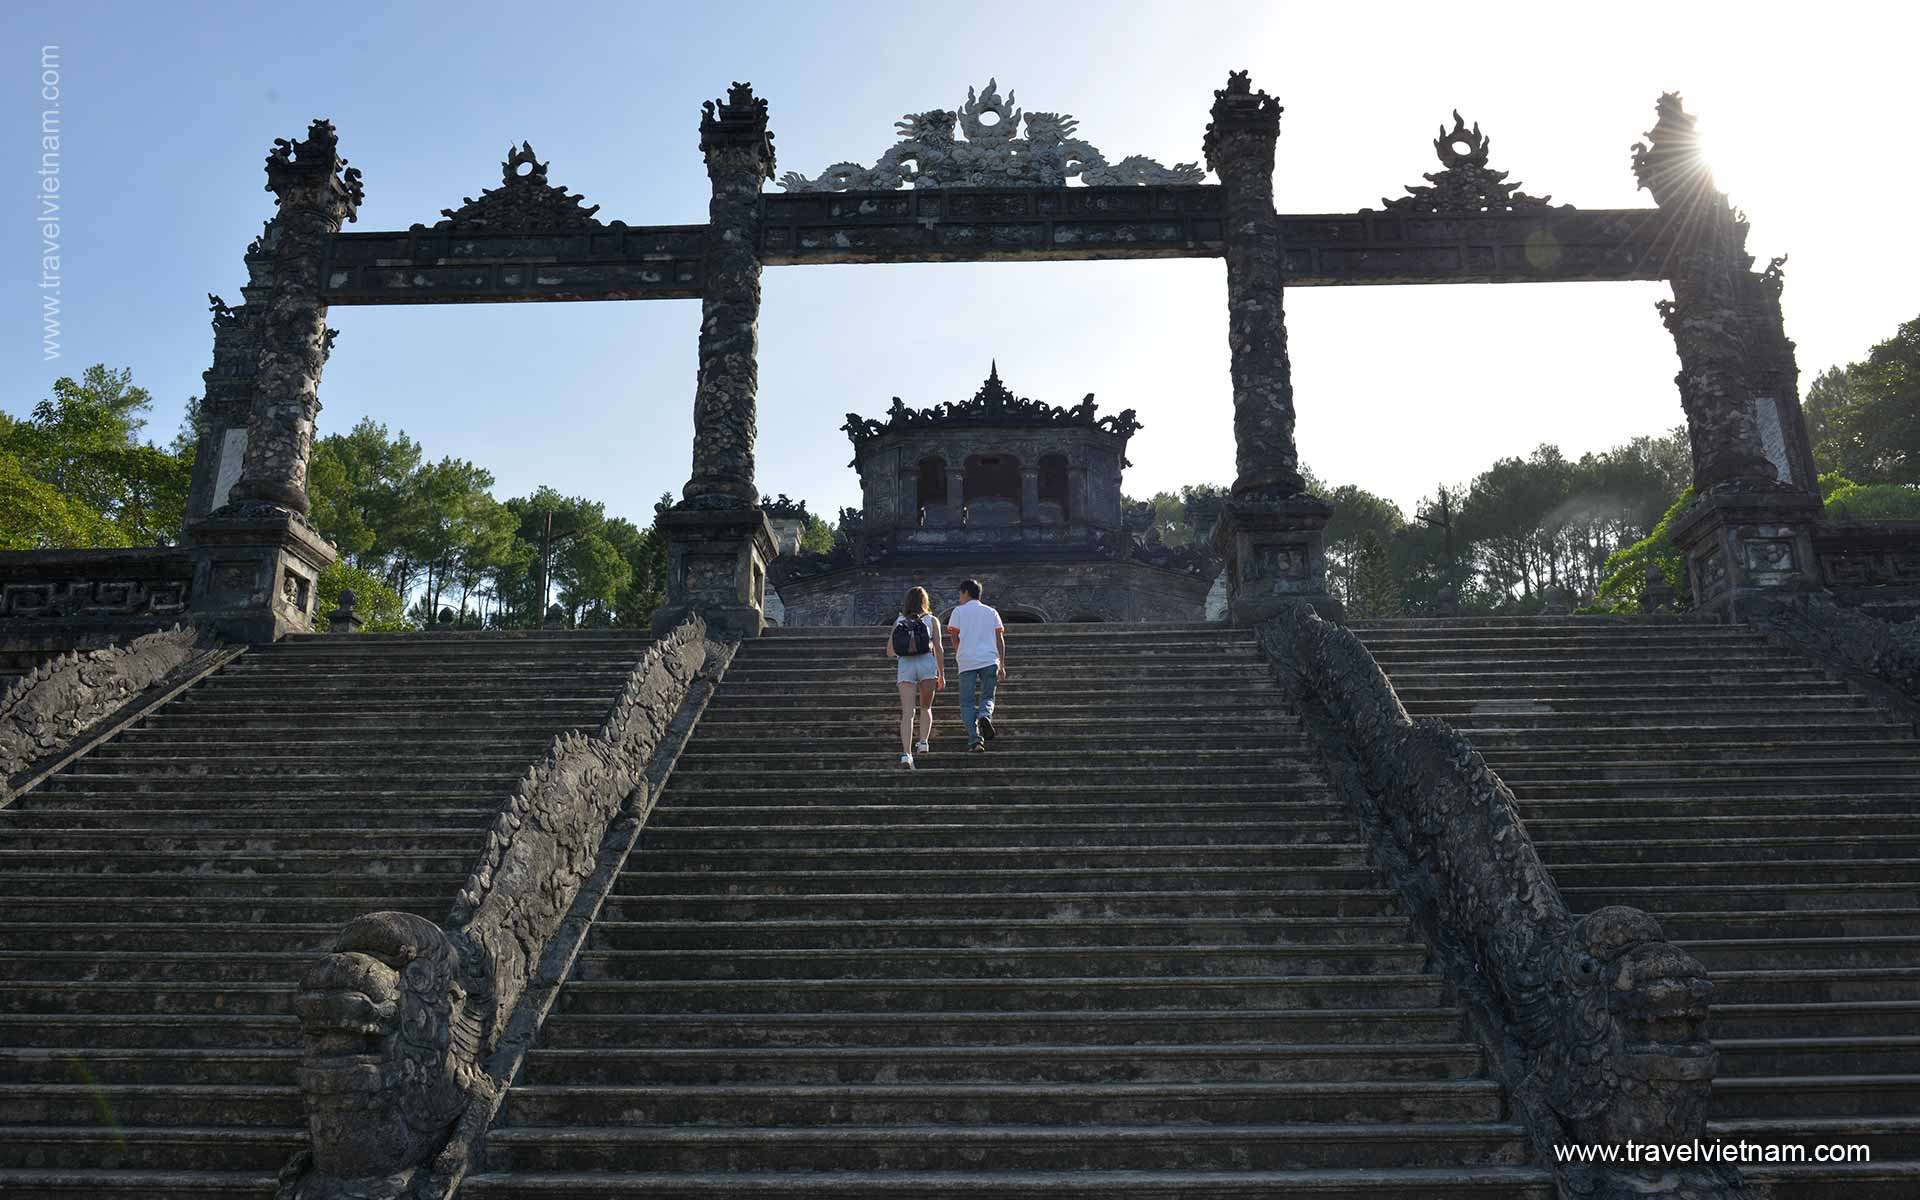 Visiting Cultural sites and discover Vietnam history of 4 thousand years